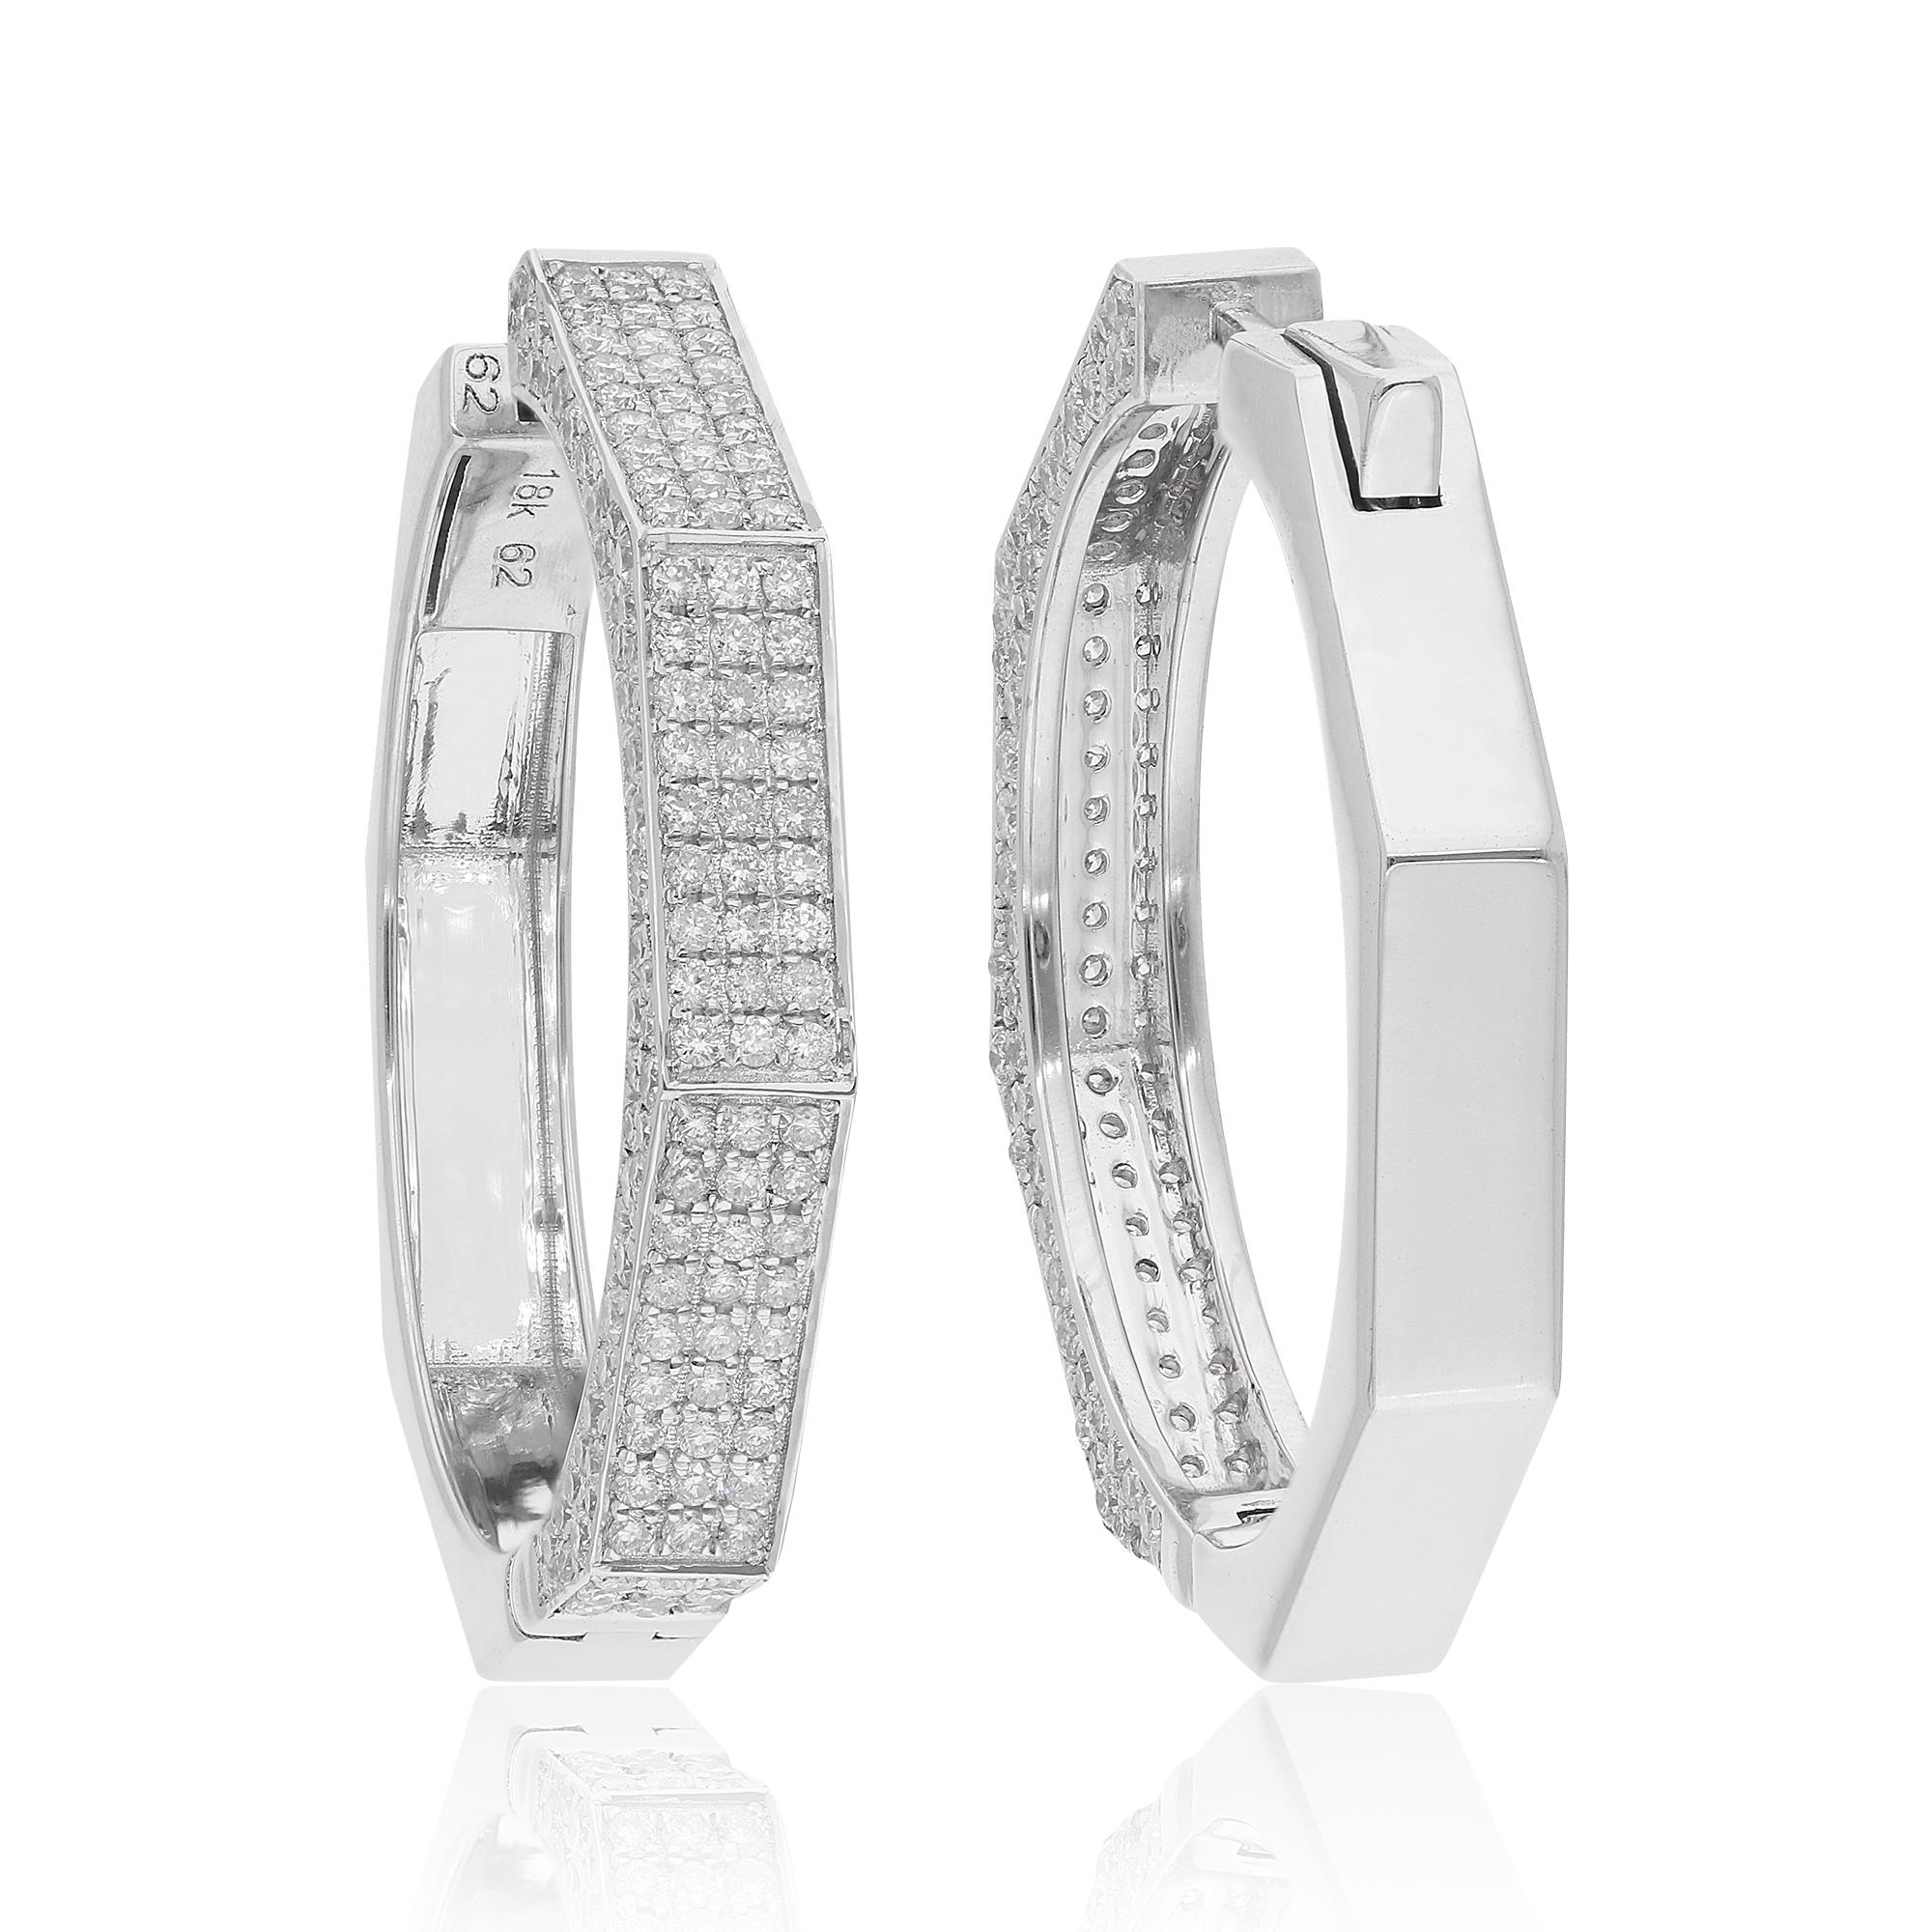 Indulge in the luxurious glamour of these pave diamond hoop earrings, meticulously crafted in 14 karat white gold. Each earring showcases a dazzling array of natural diamonds totaling 2.17 carats, expertly set in a pave setting to create a